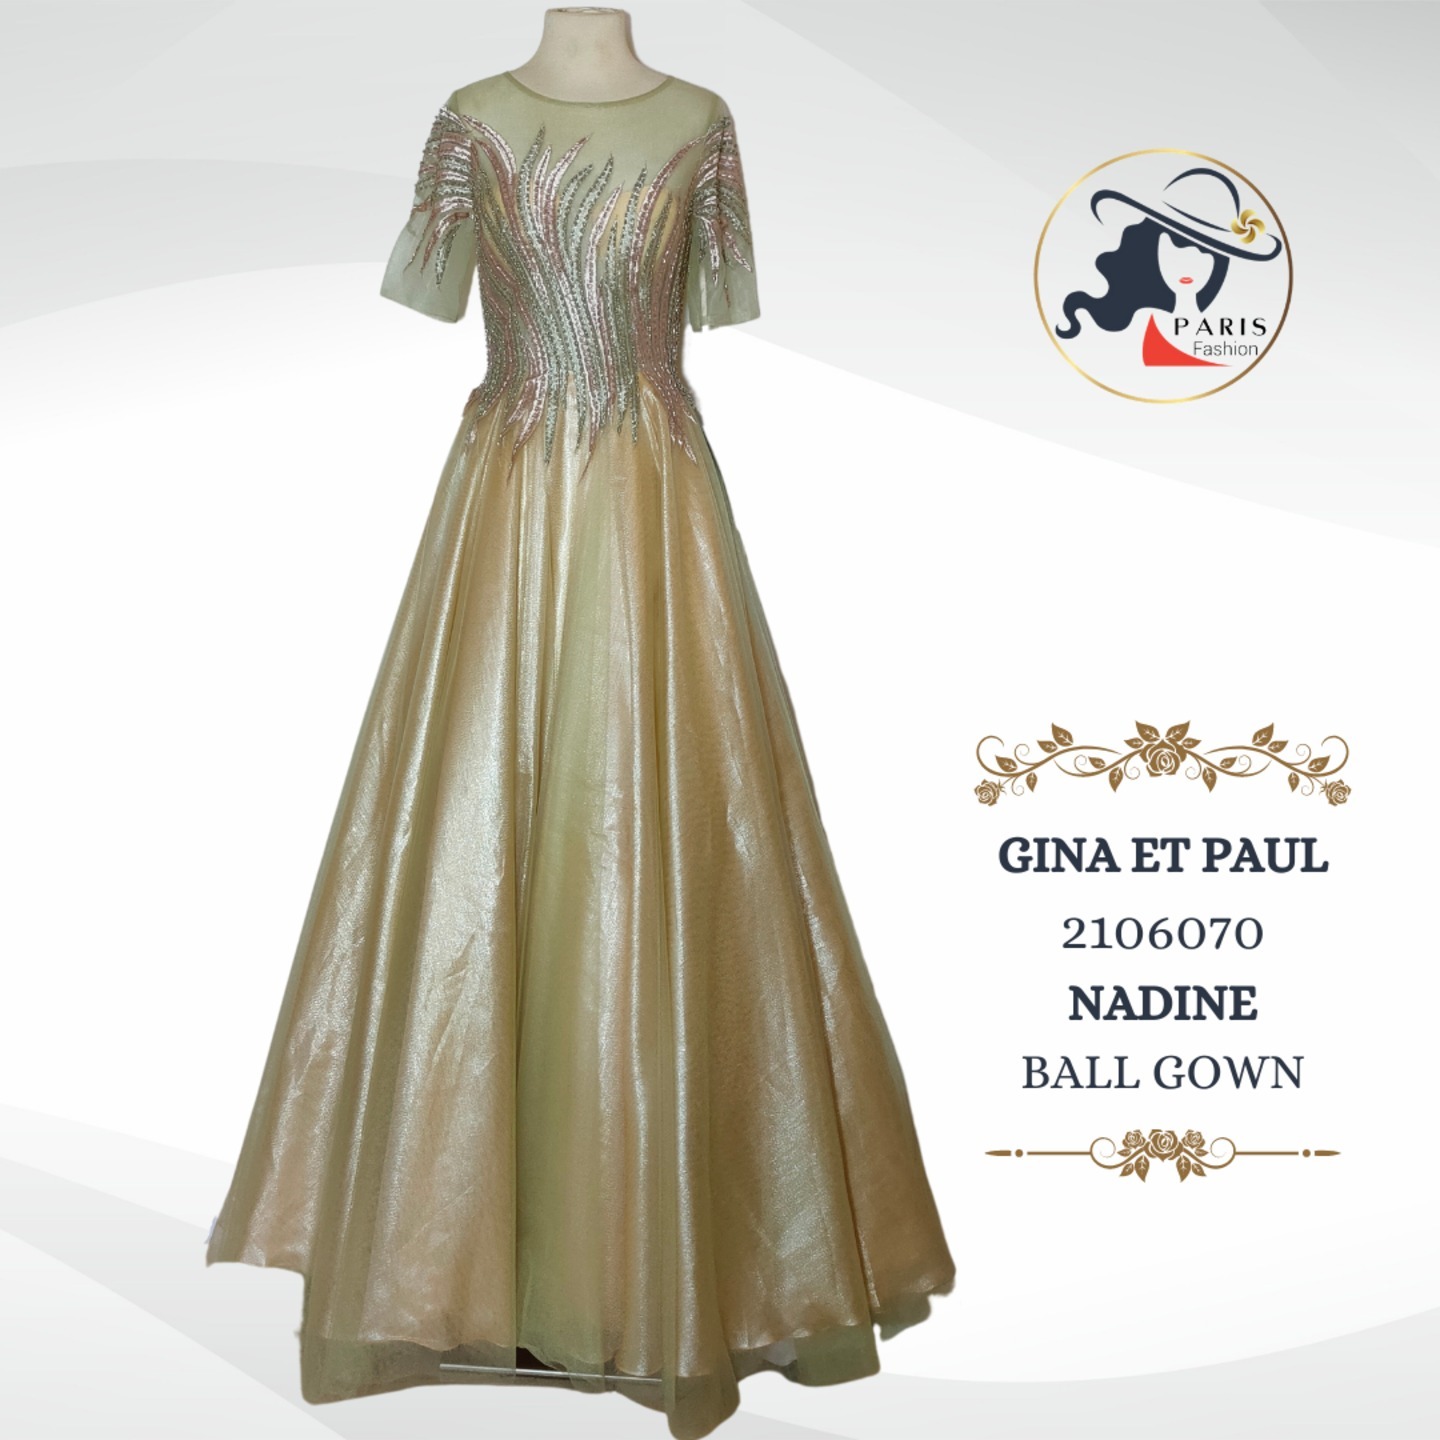 GINA ET PAUL 216070 NADINE SHIMMERY BALL GOWN